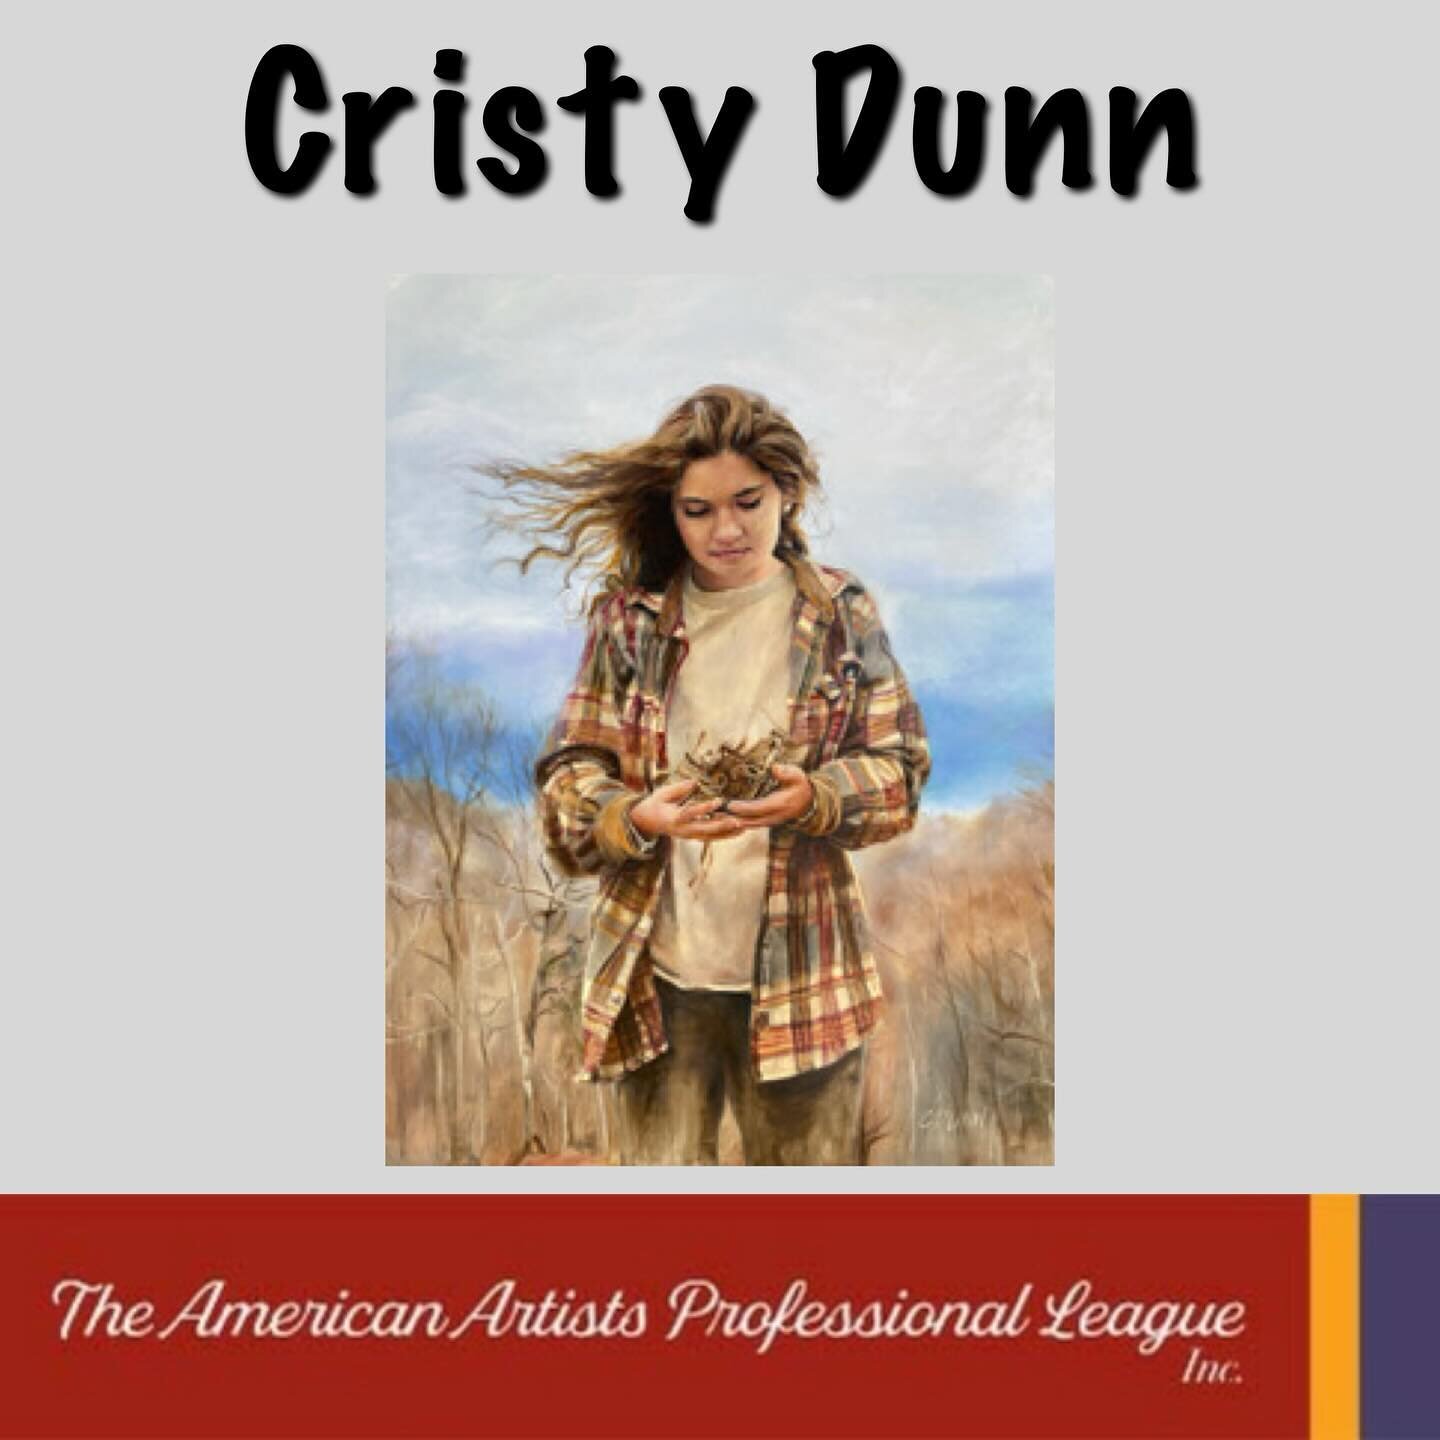 Artist Spotlight!  Today the American Artist Professional League proudly presents member Cristy Dunn.  In her own words&hellip;

My paintings and murals tell the stories of Makers and of the power of the Arts to uplift the human spirit. I create&nbsp